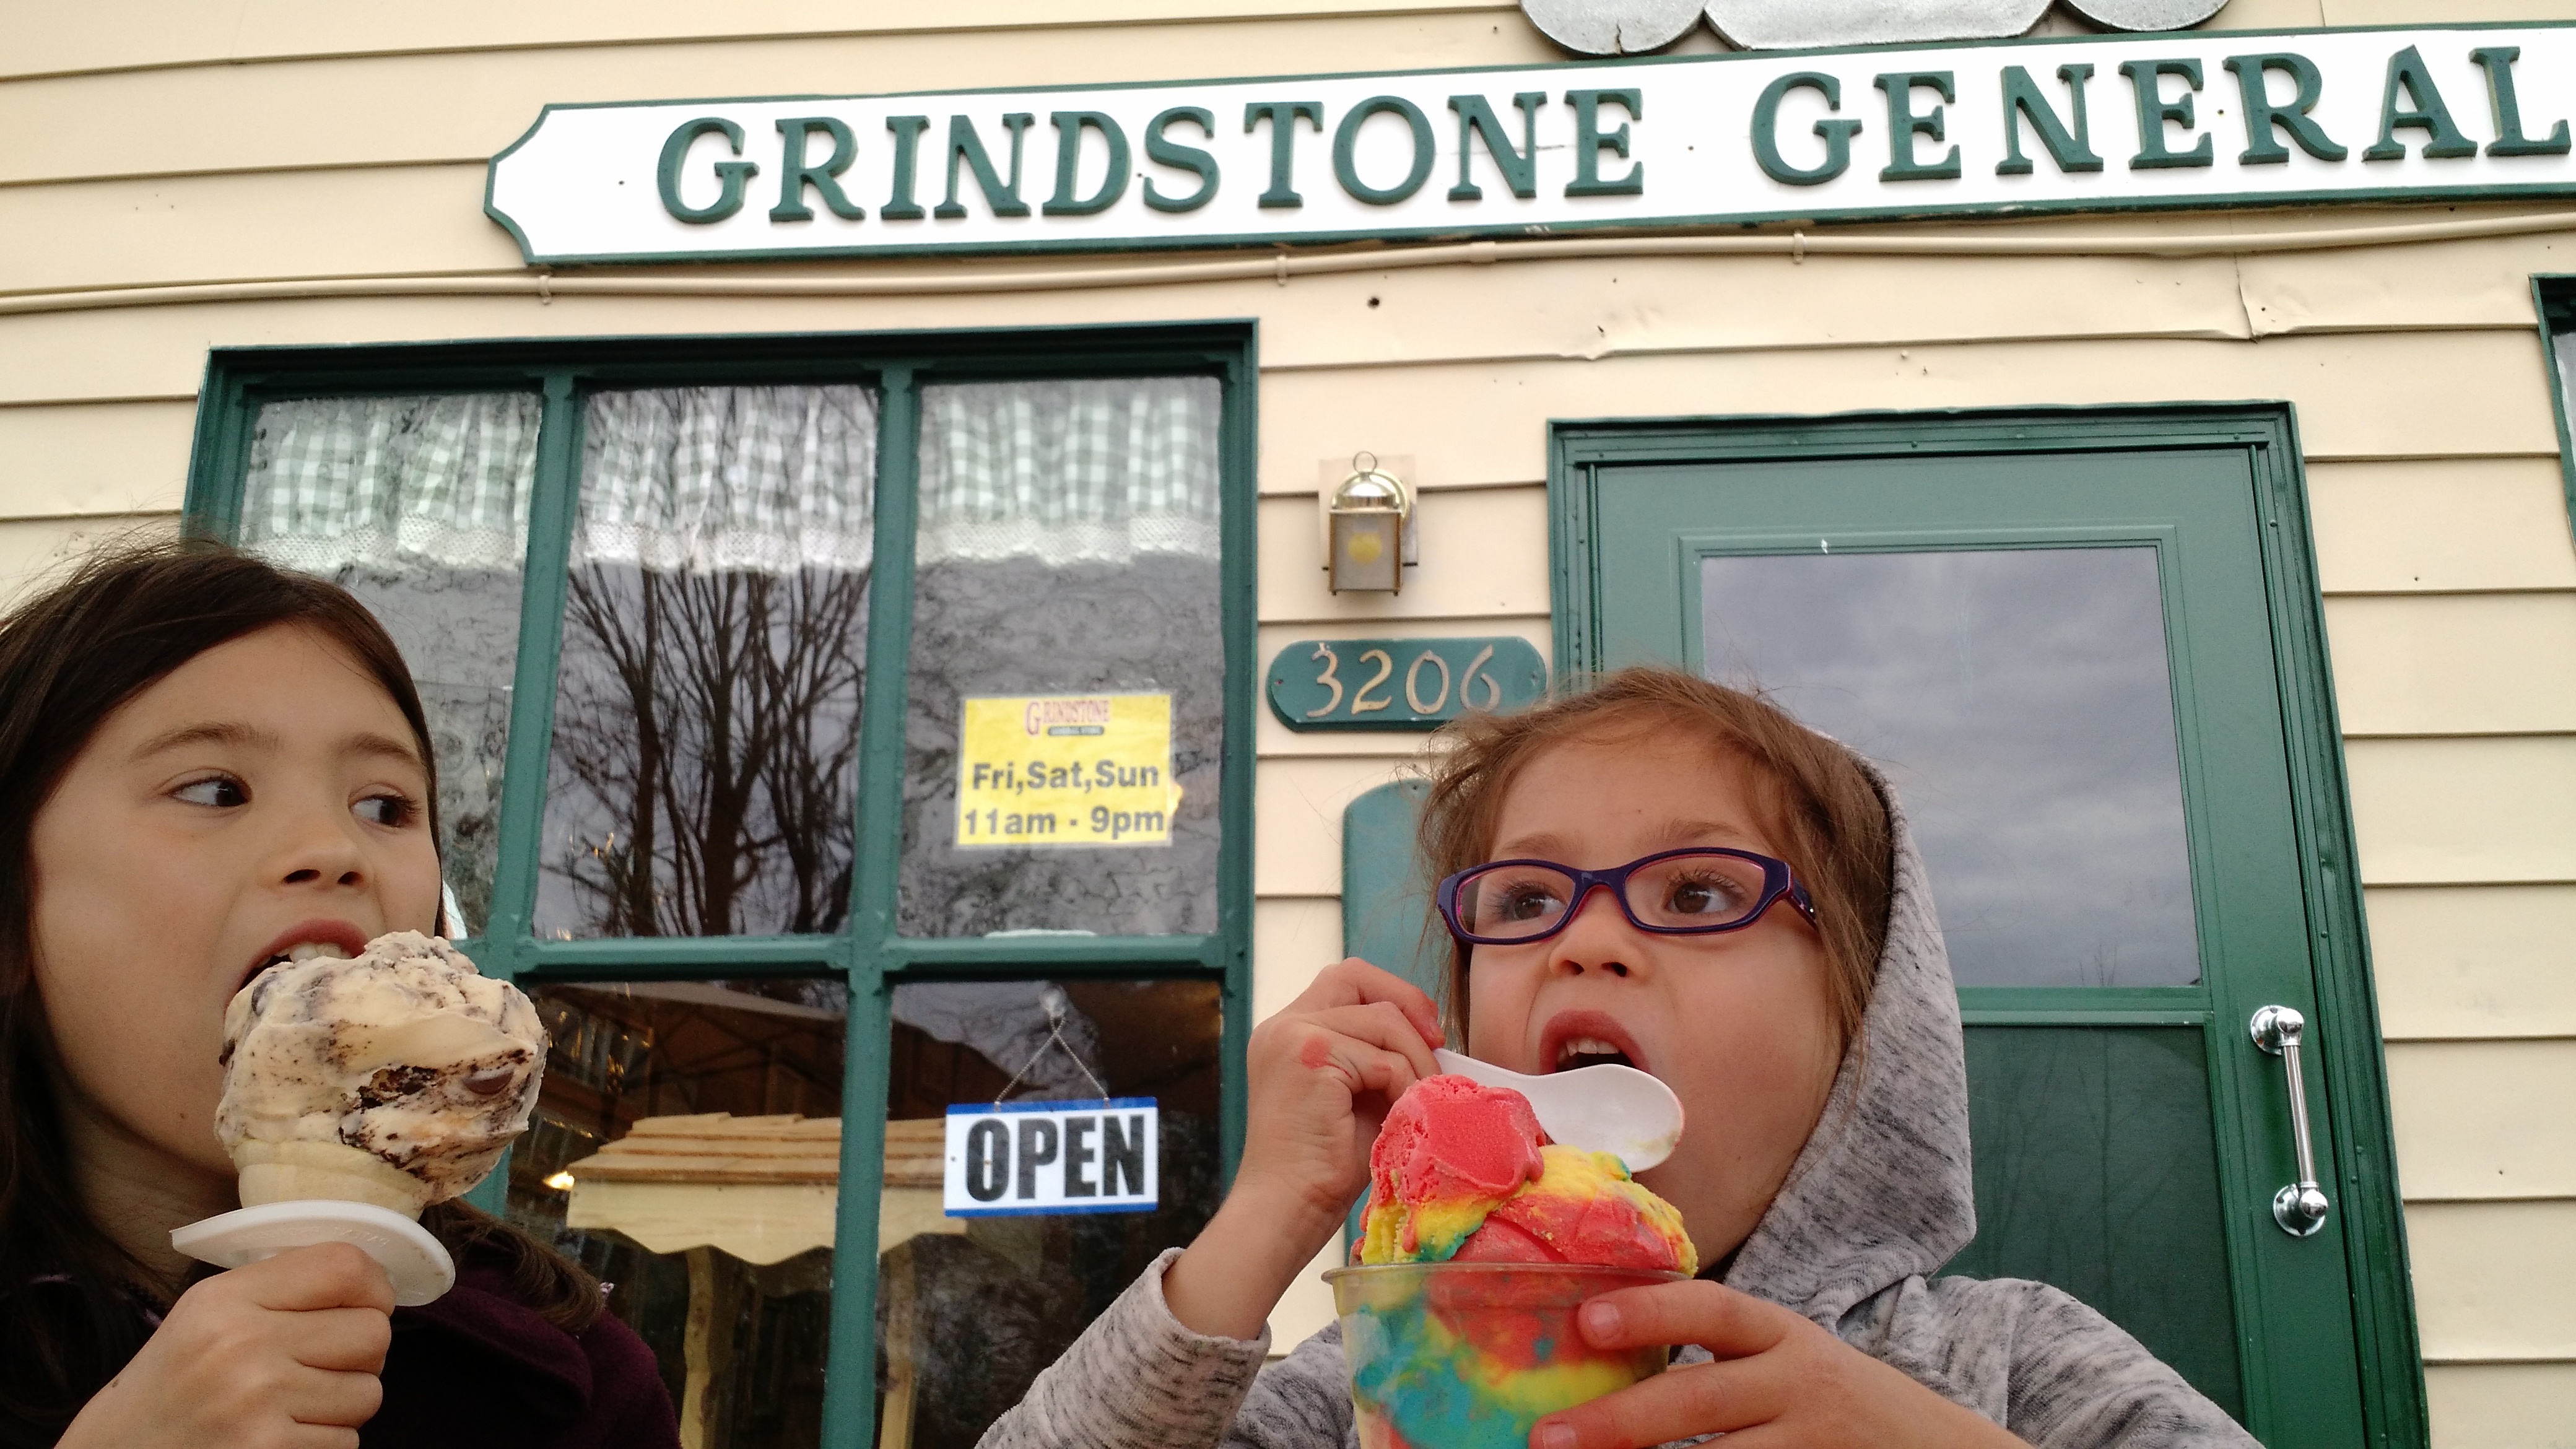 Ice cream is a crowd favorite in Grindstone City.